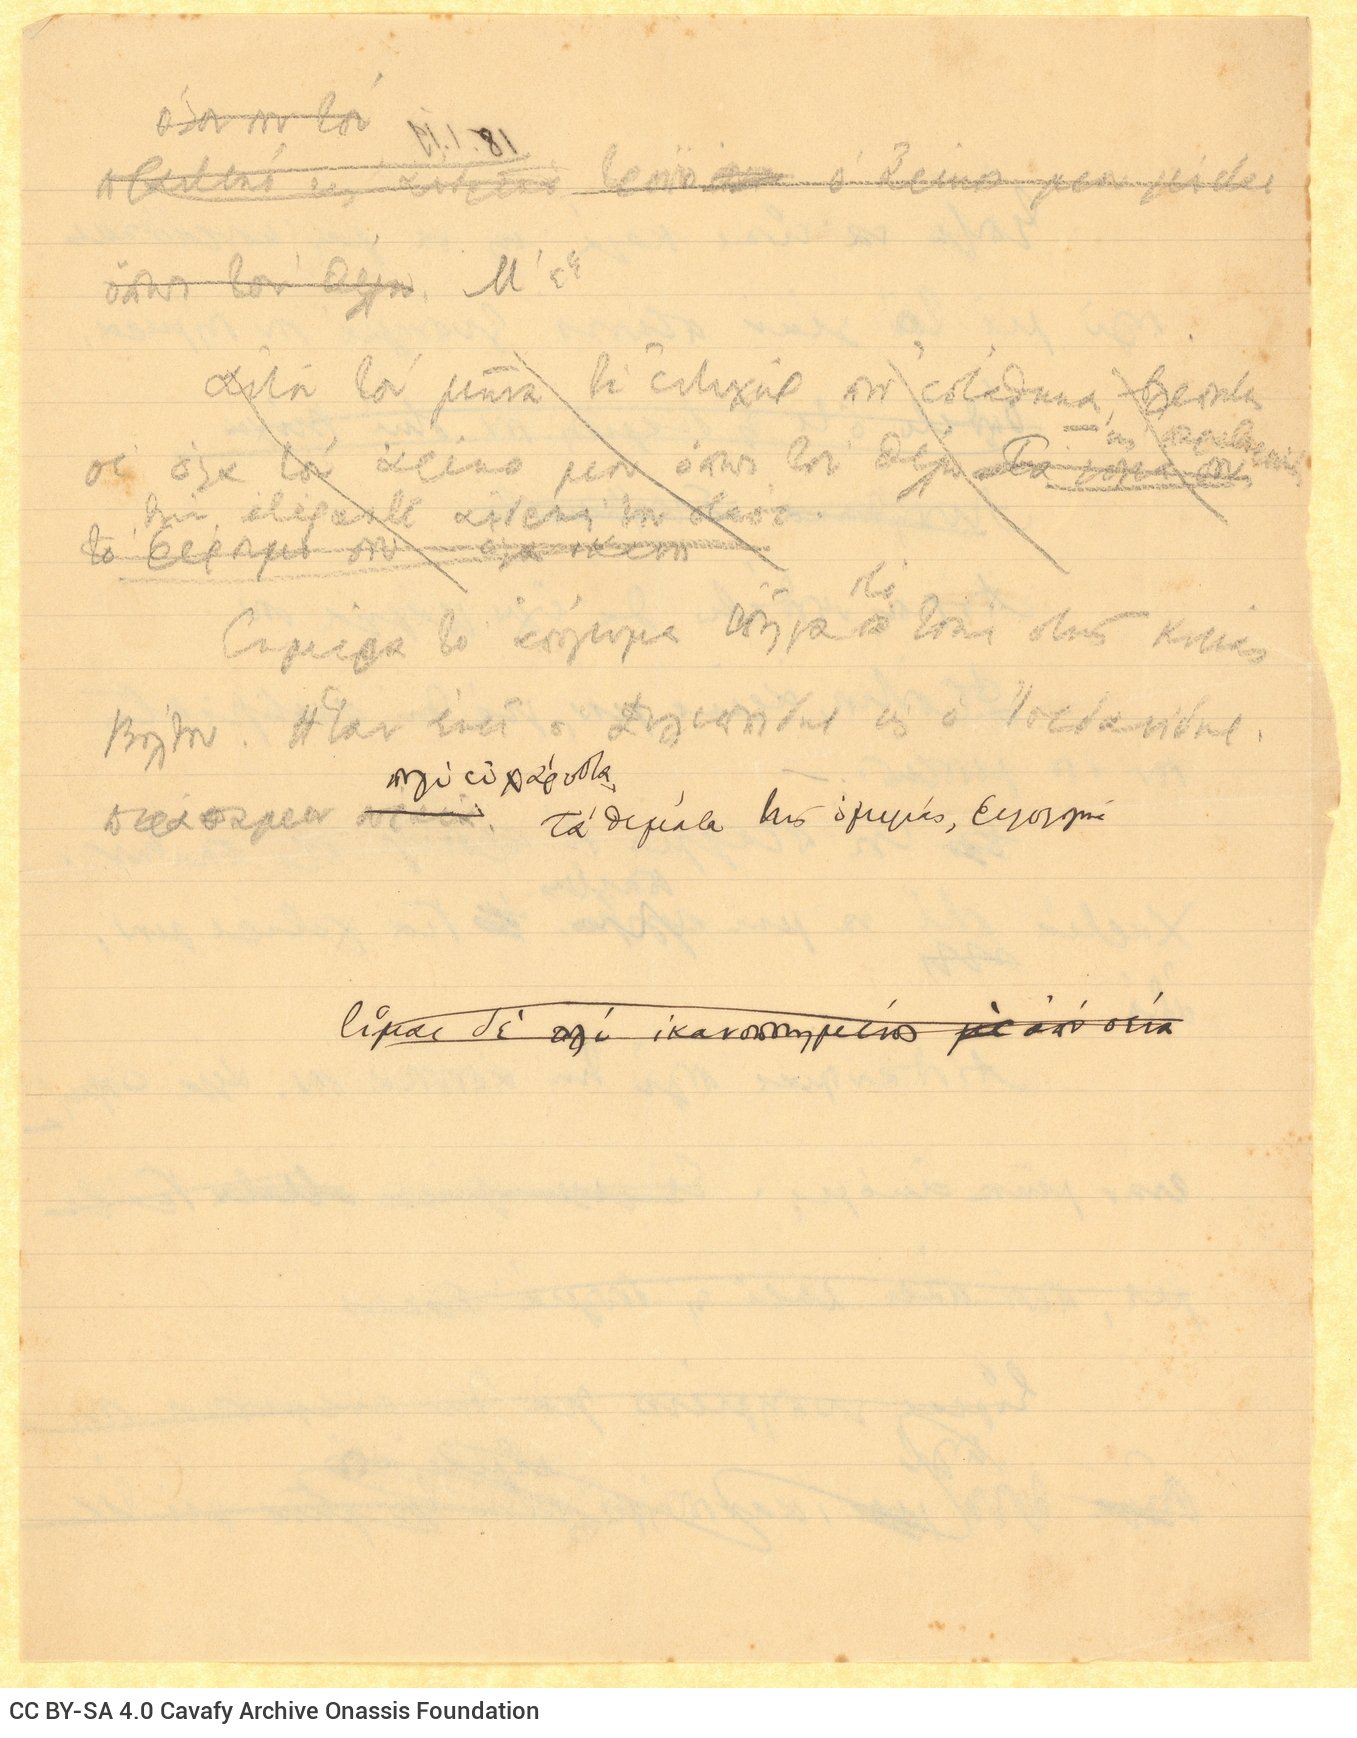 Handwritten draft letter by Cavafy to Alekos [Singopoulo] on both sides of a ruled sheet. Cancellations. The poet advises Sin